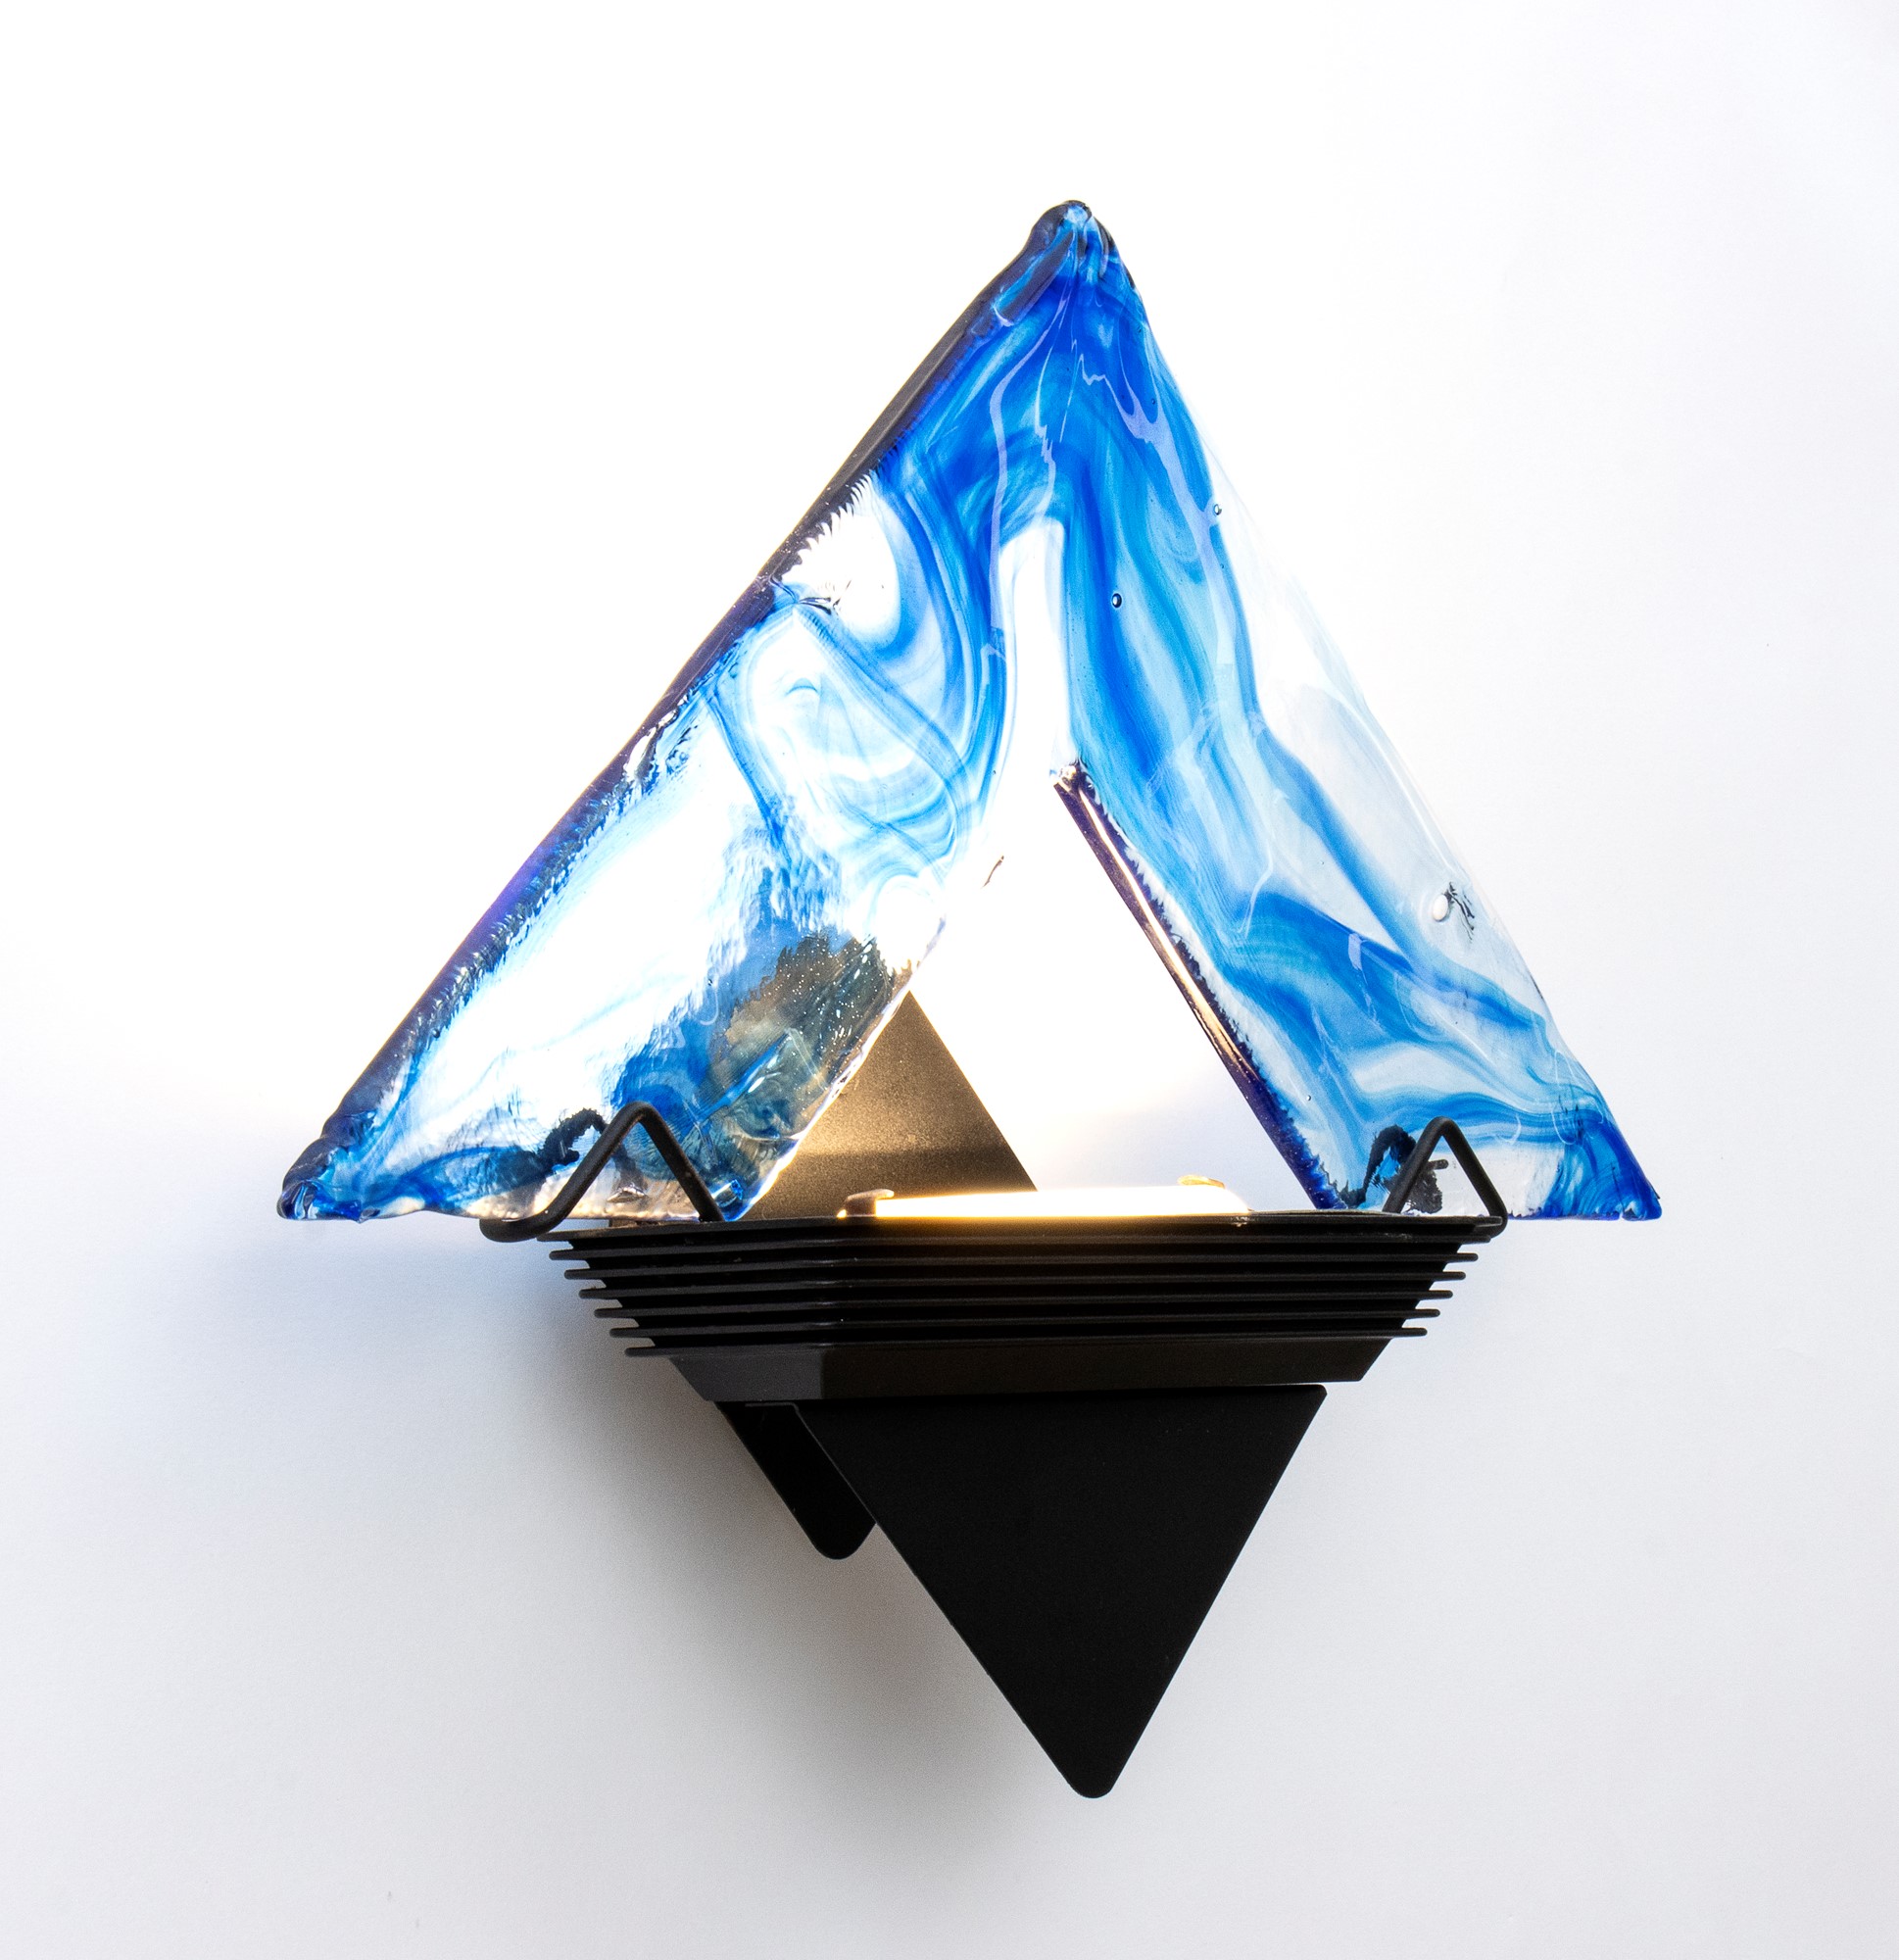 La Murrina wing lamp in hand blown Murano glass mounted on a triangular frame - Image 11 of 27